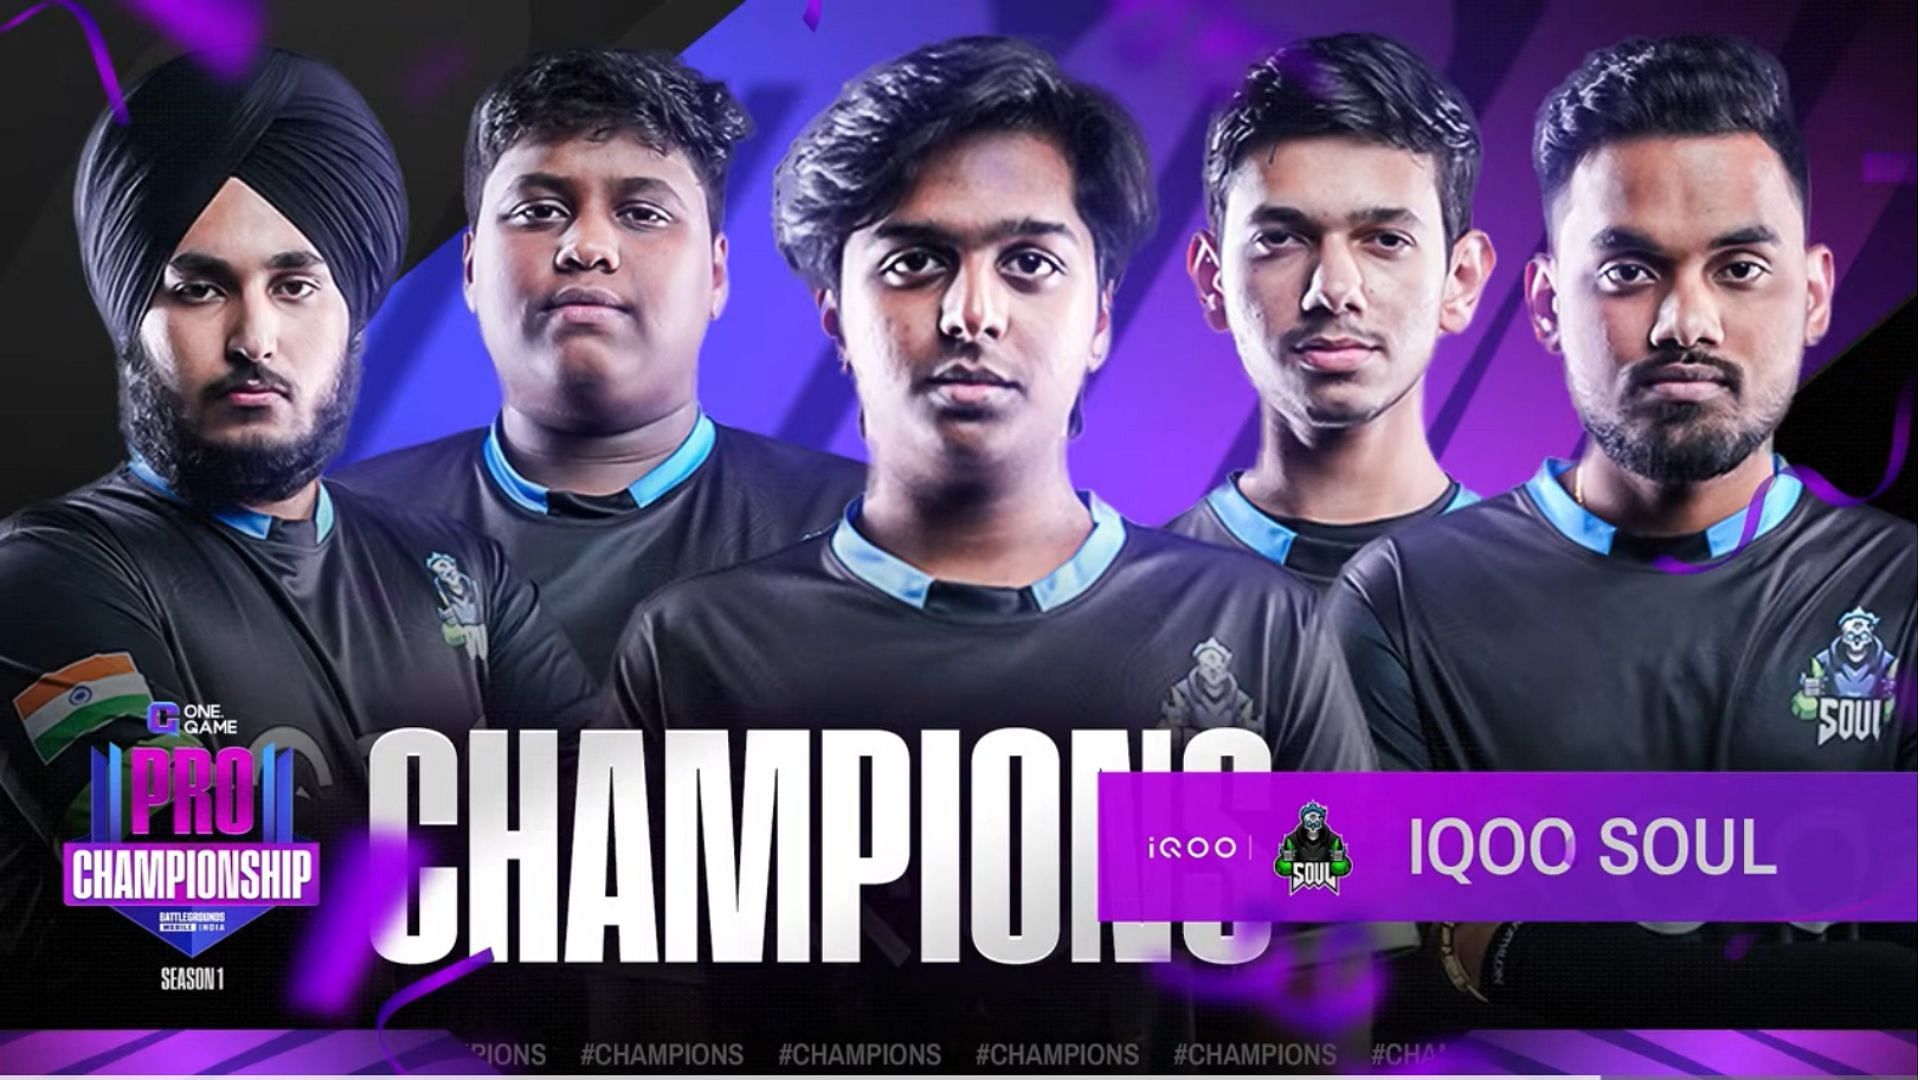 Team Soul crowned champions of One Game Pro Championship Season 1 (Image via One Game)